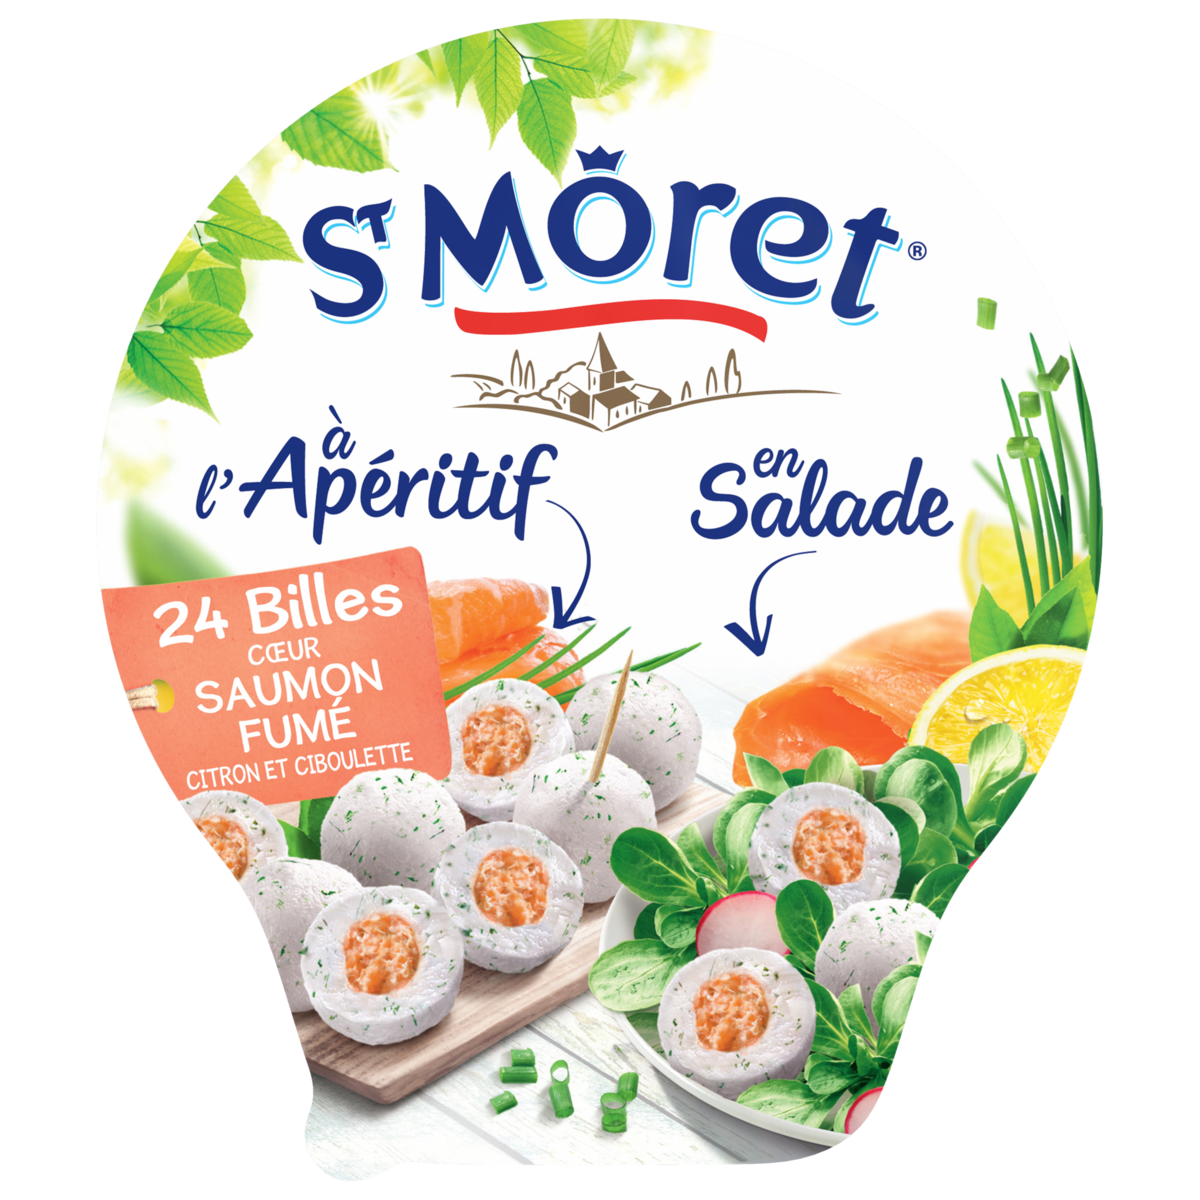 St Moret Apero Cheese balls filled with smoked Salmon 100g